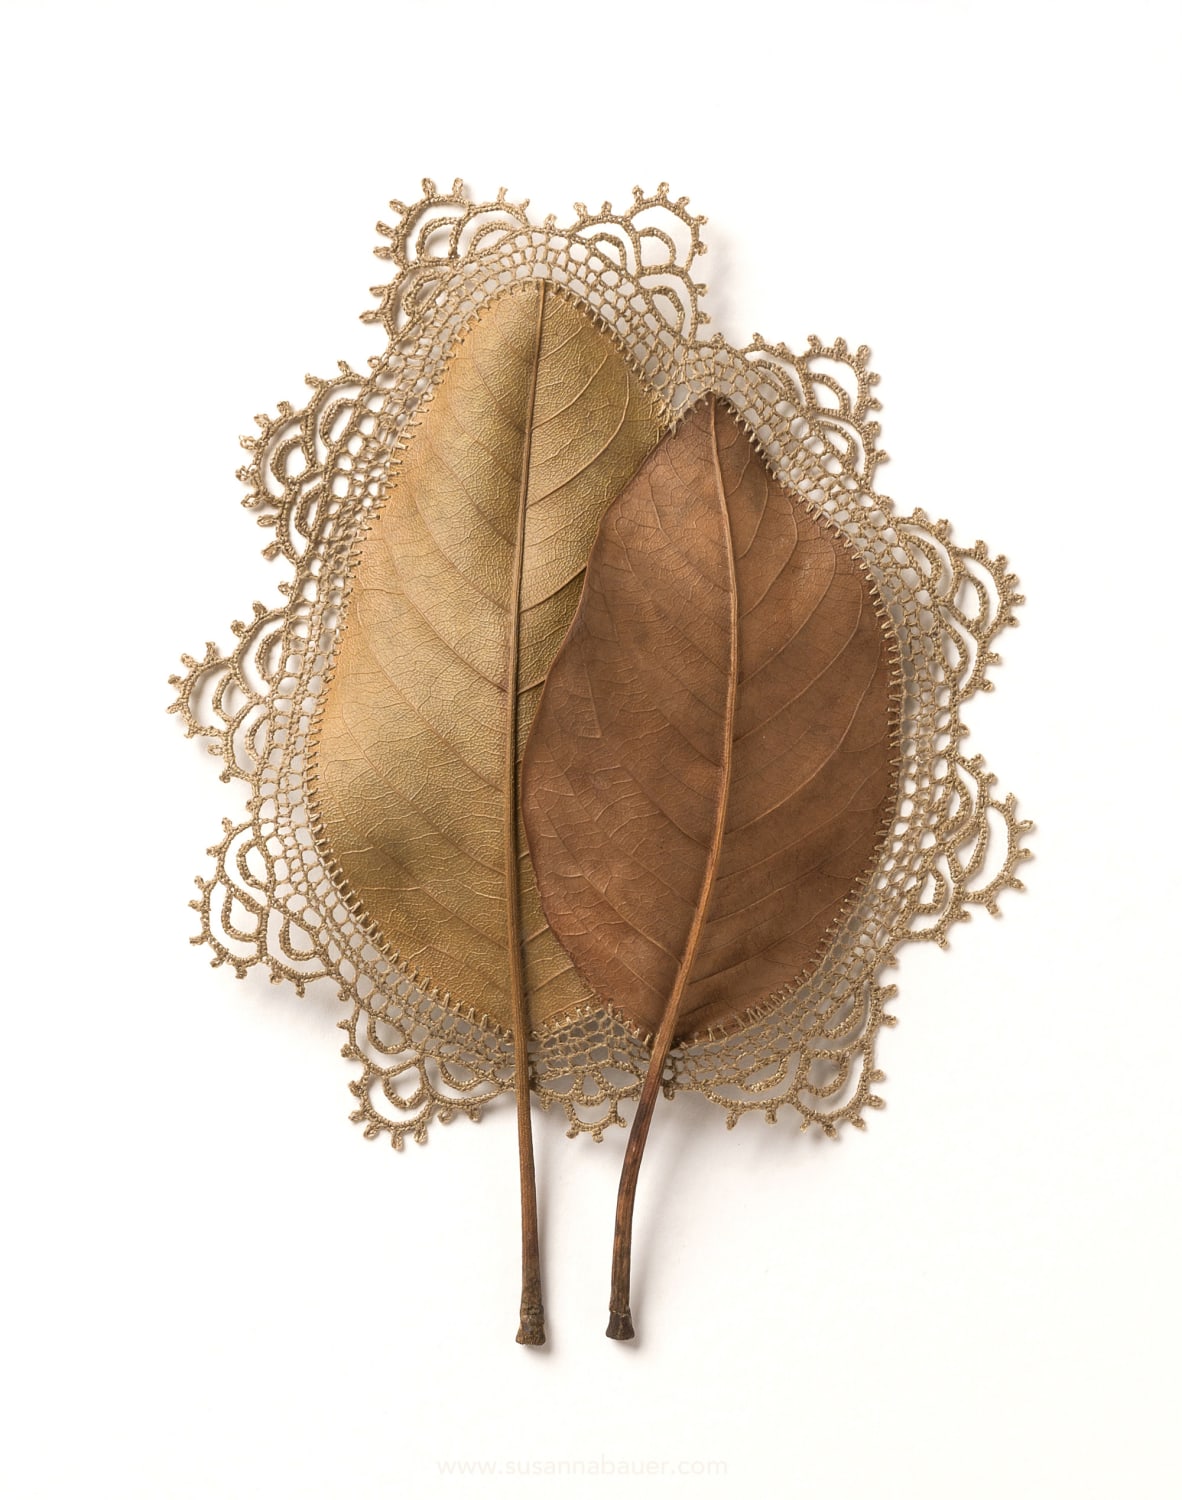 Found Leaves with Delicate Crochet Embellishments by Susanna Bauer — Colossal